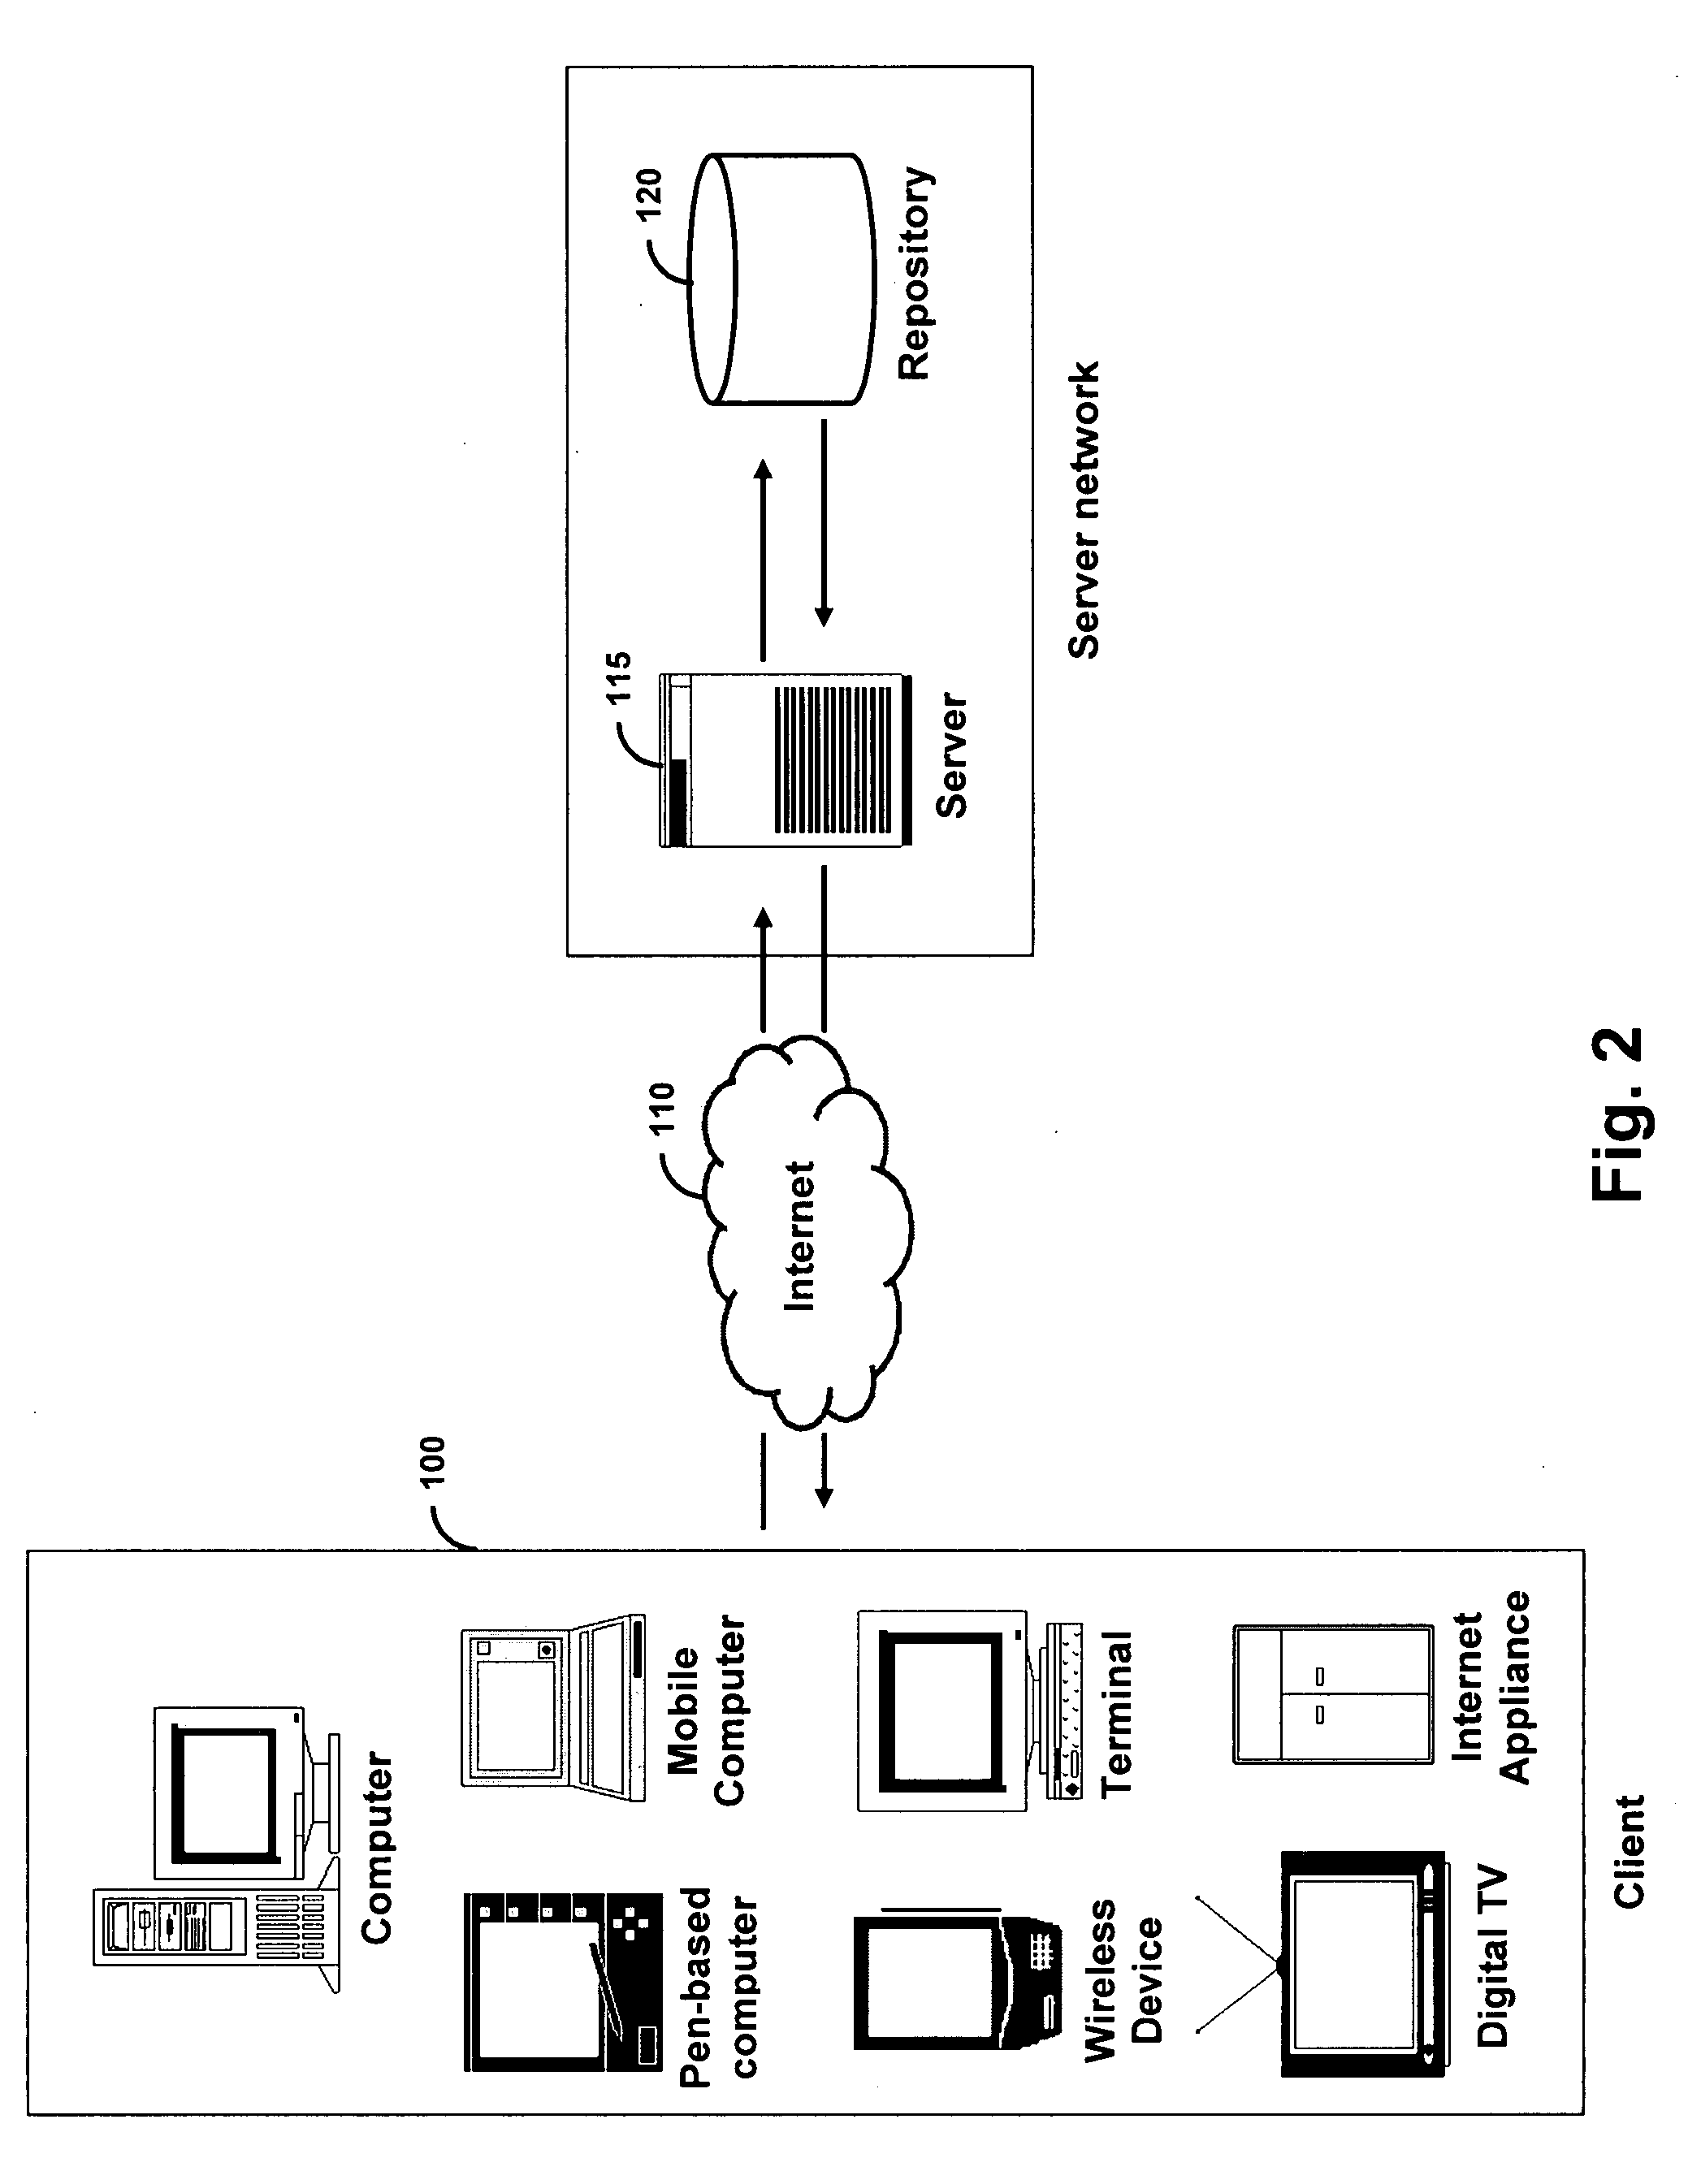 Method and system for ontology modeling based on the exchange of annotations